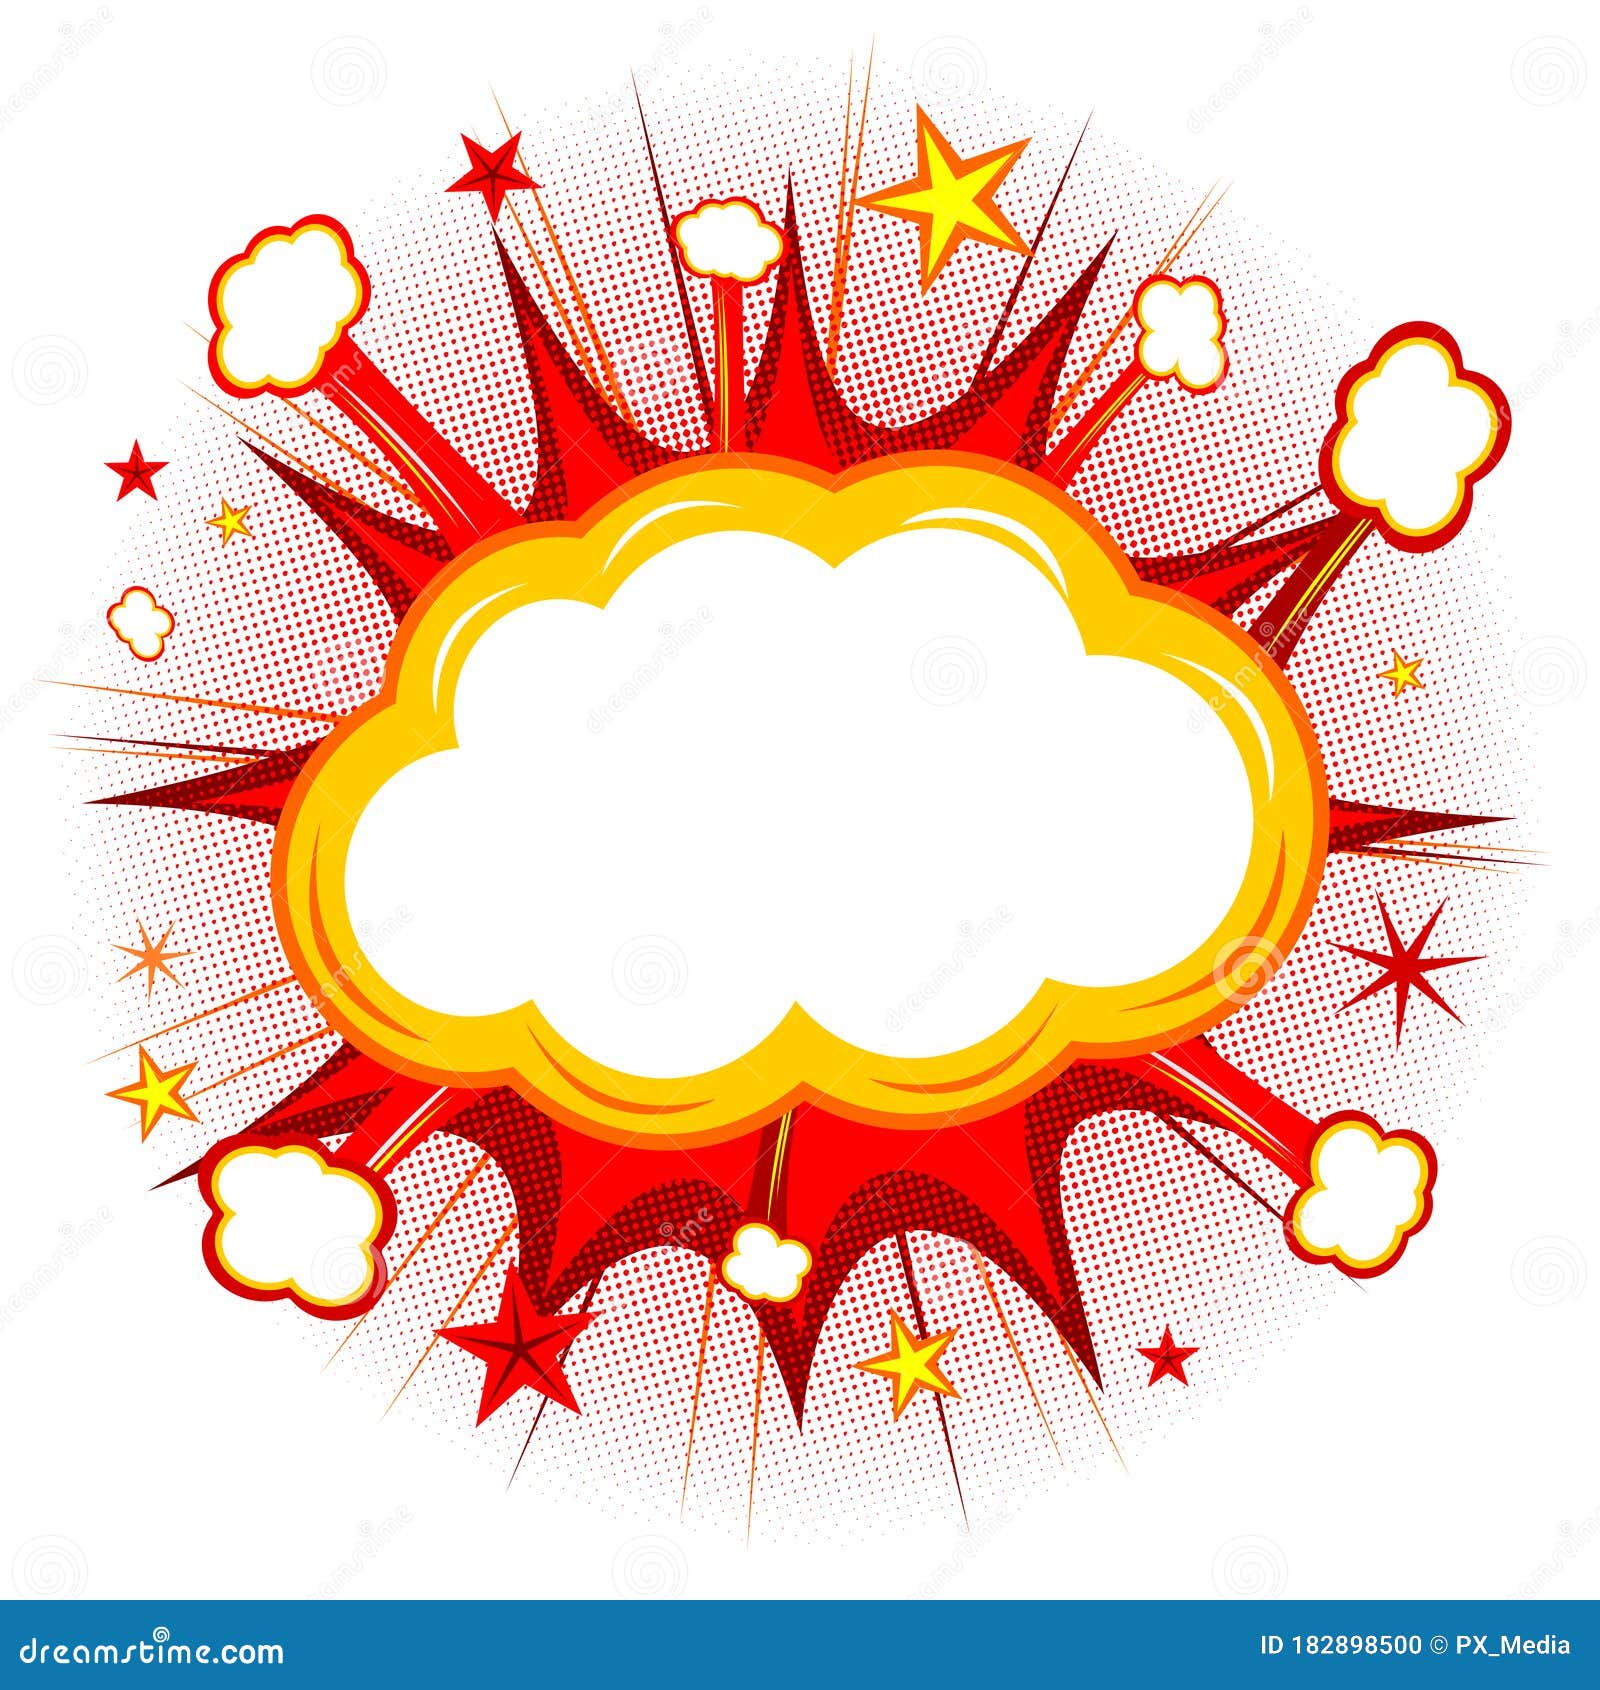 Empty Cloud Illustration - Red Explosion, White Background Stock ...